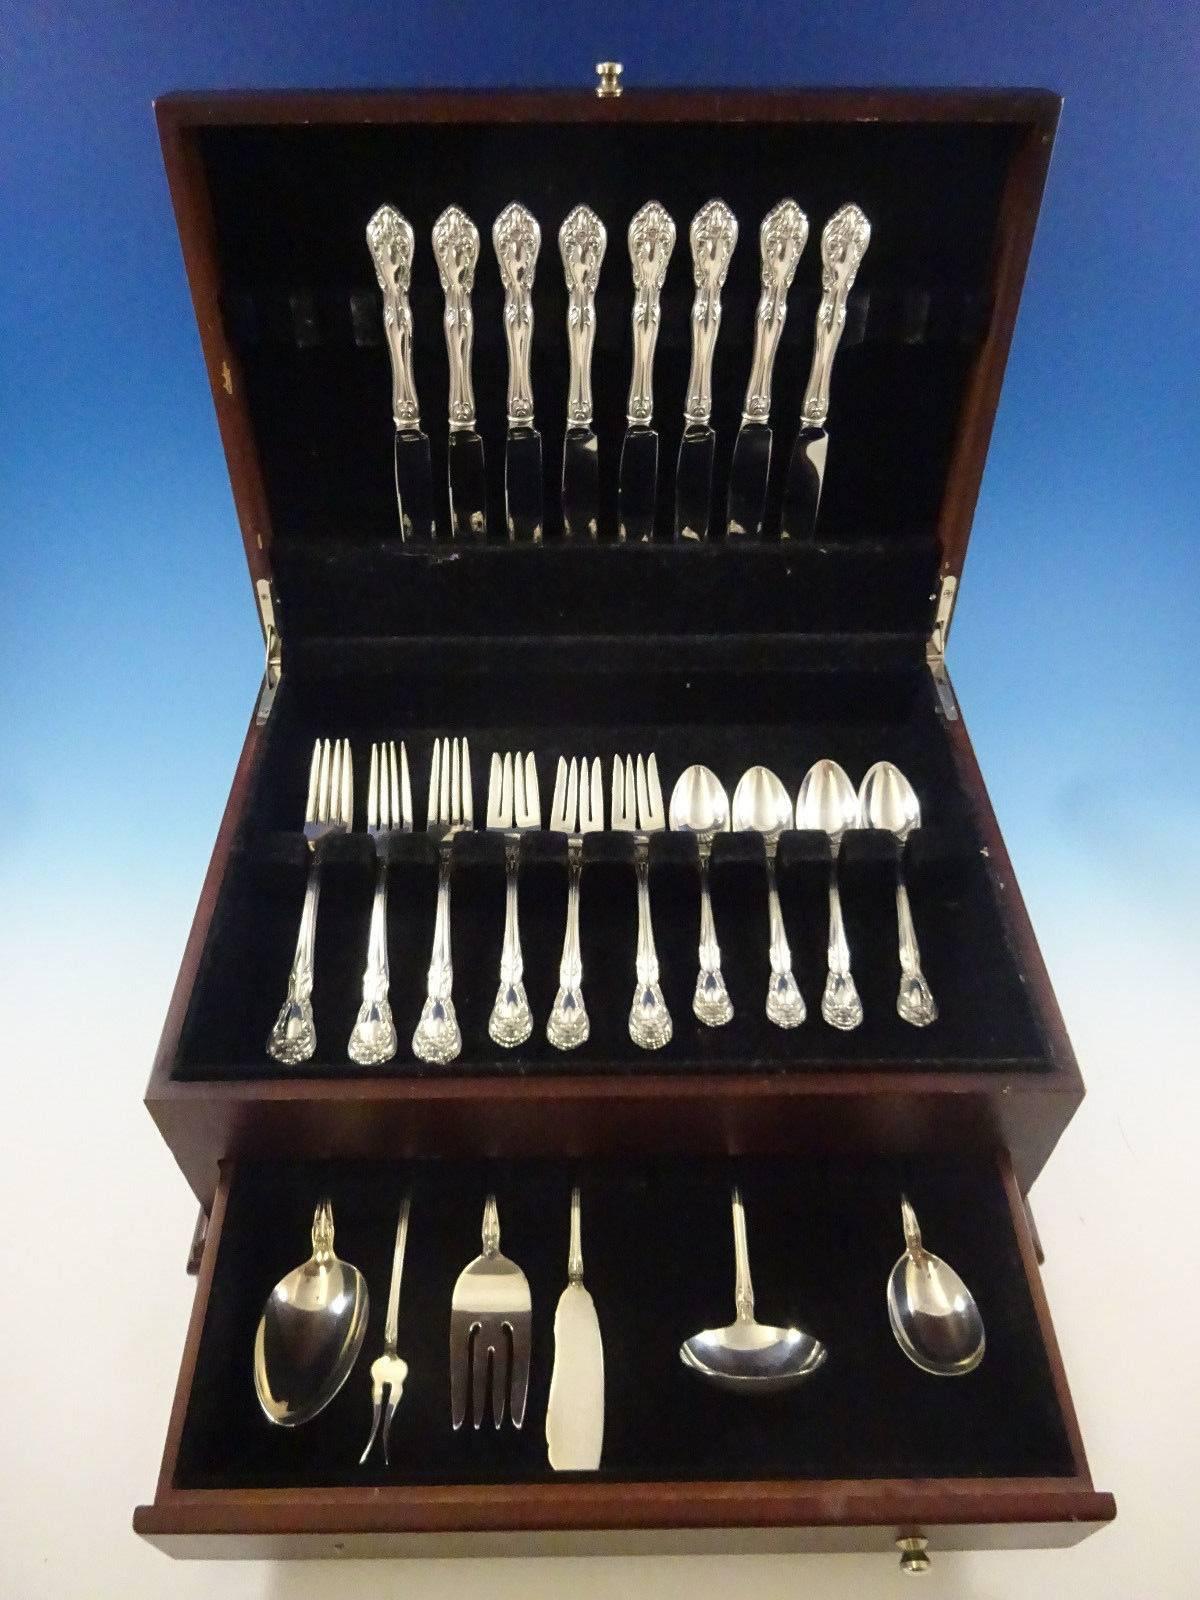 Chateau rose by Alvin sterling silver flatware set - 38 pieces. This set includes: 

eight knives, 8 7/8